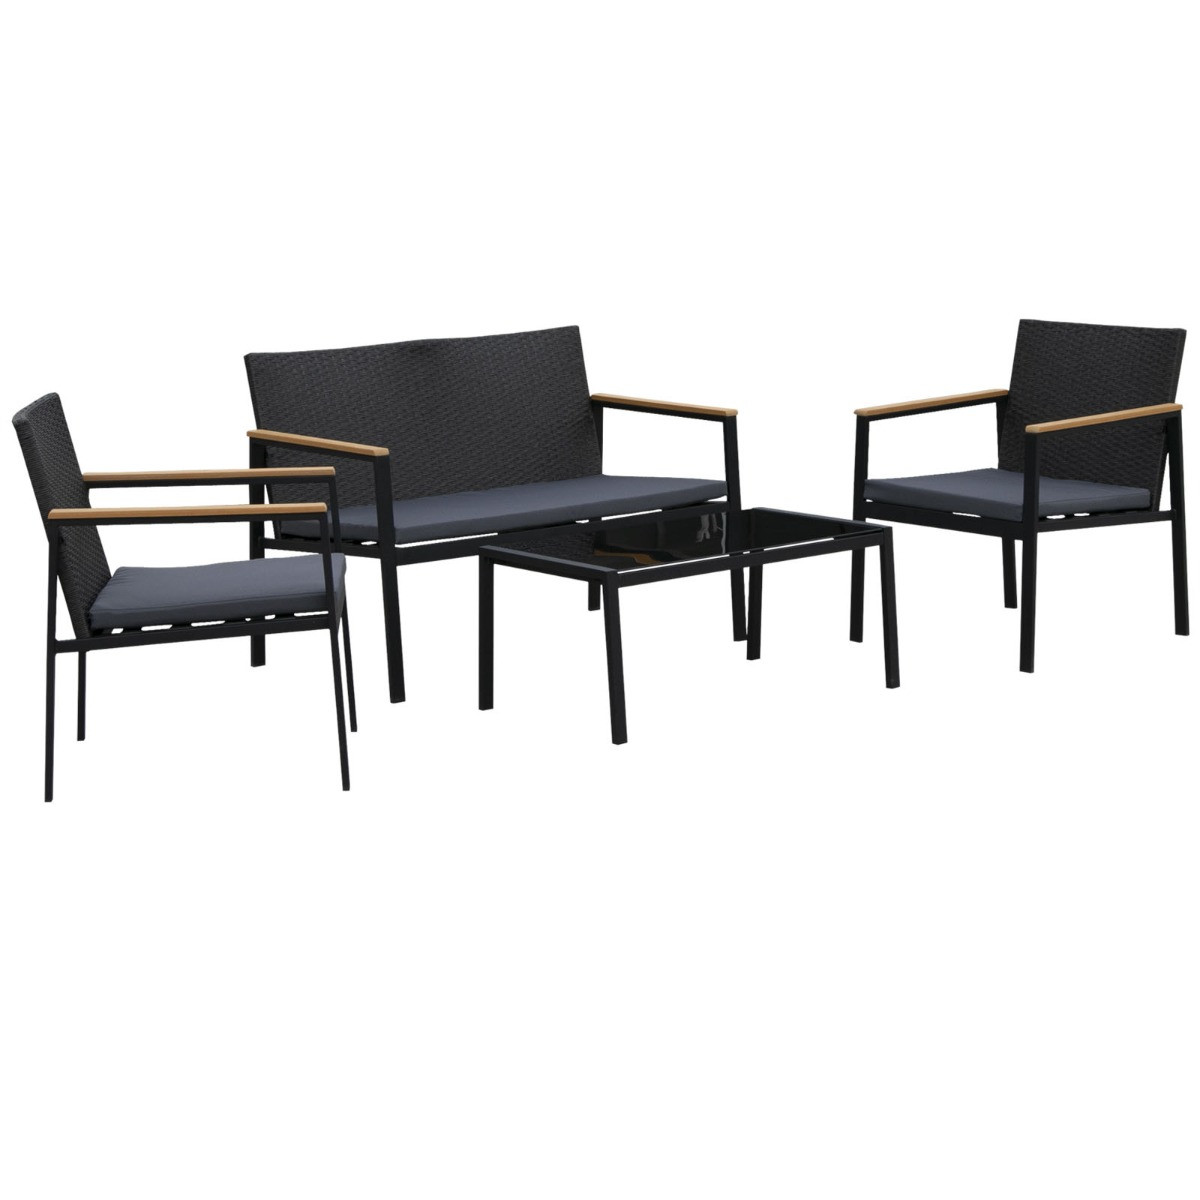 Outsunny Rattan Sofa And Chairs Set, 4 Piece - Black>